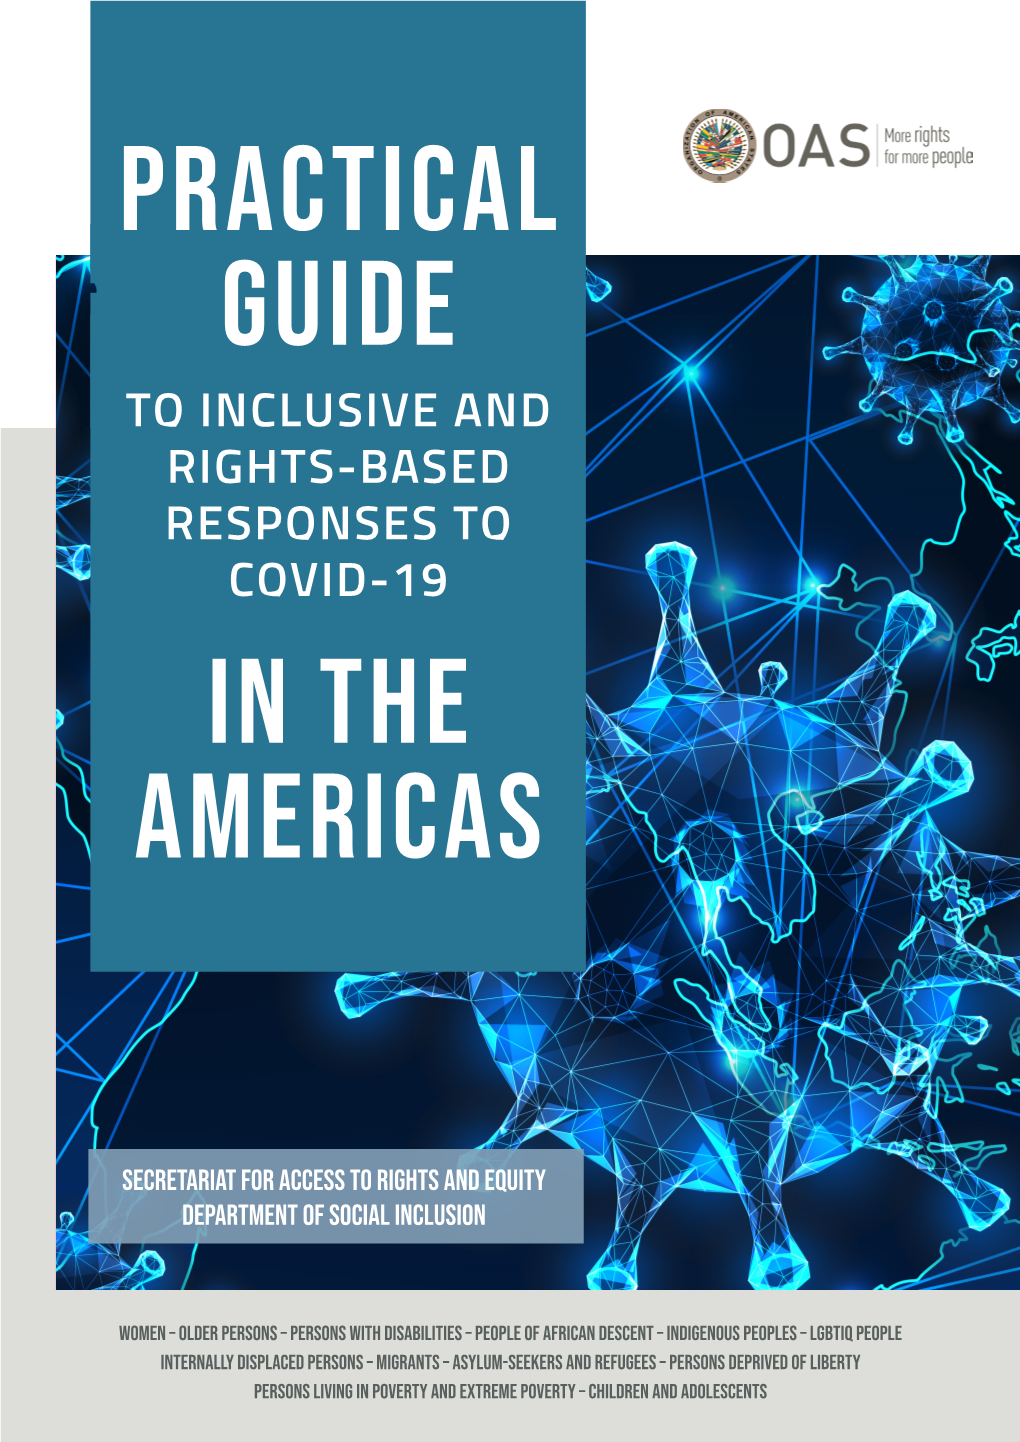 To Inclusive and Rights-Based Responses to Covid-19 in the Americas